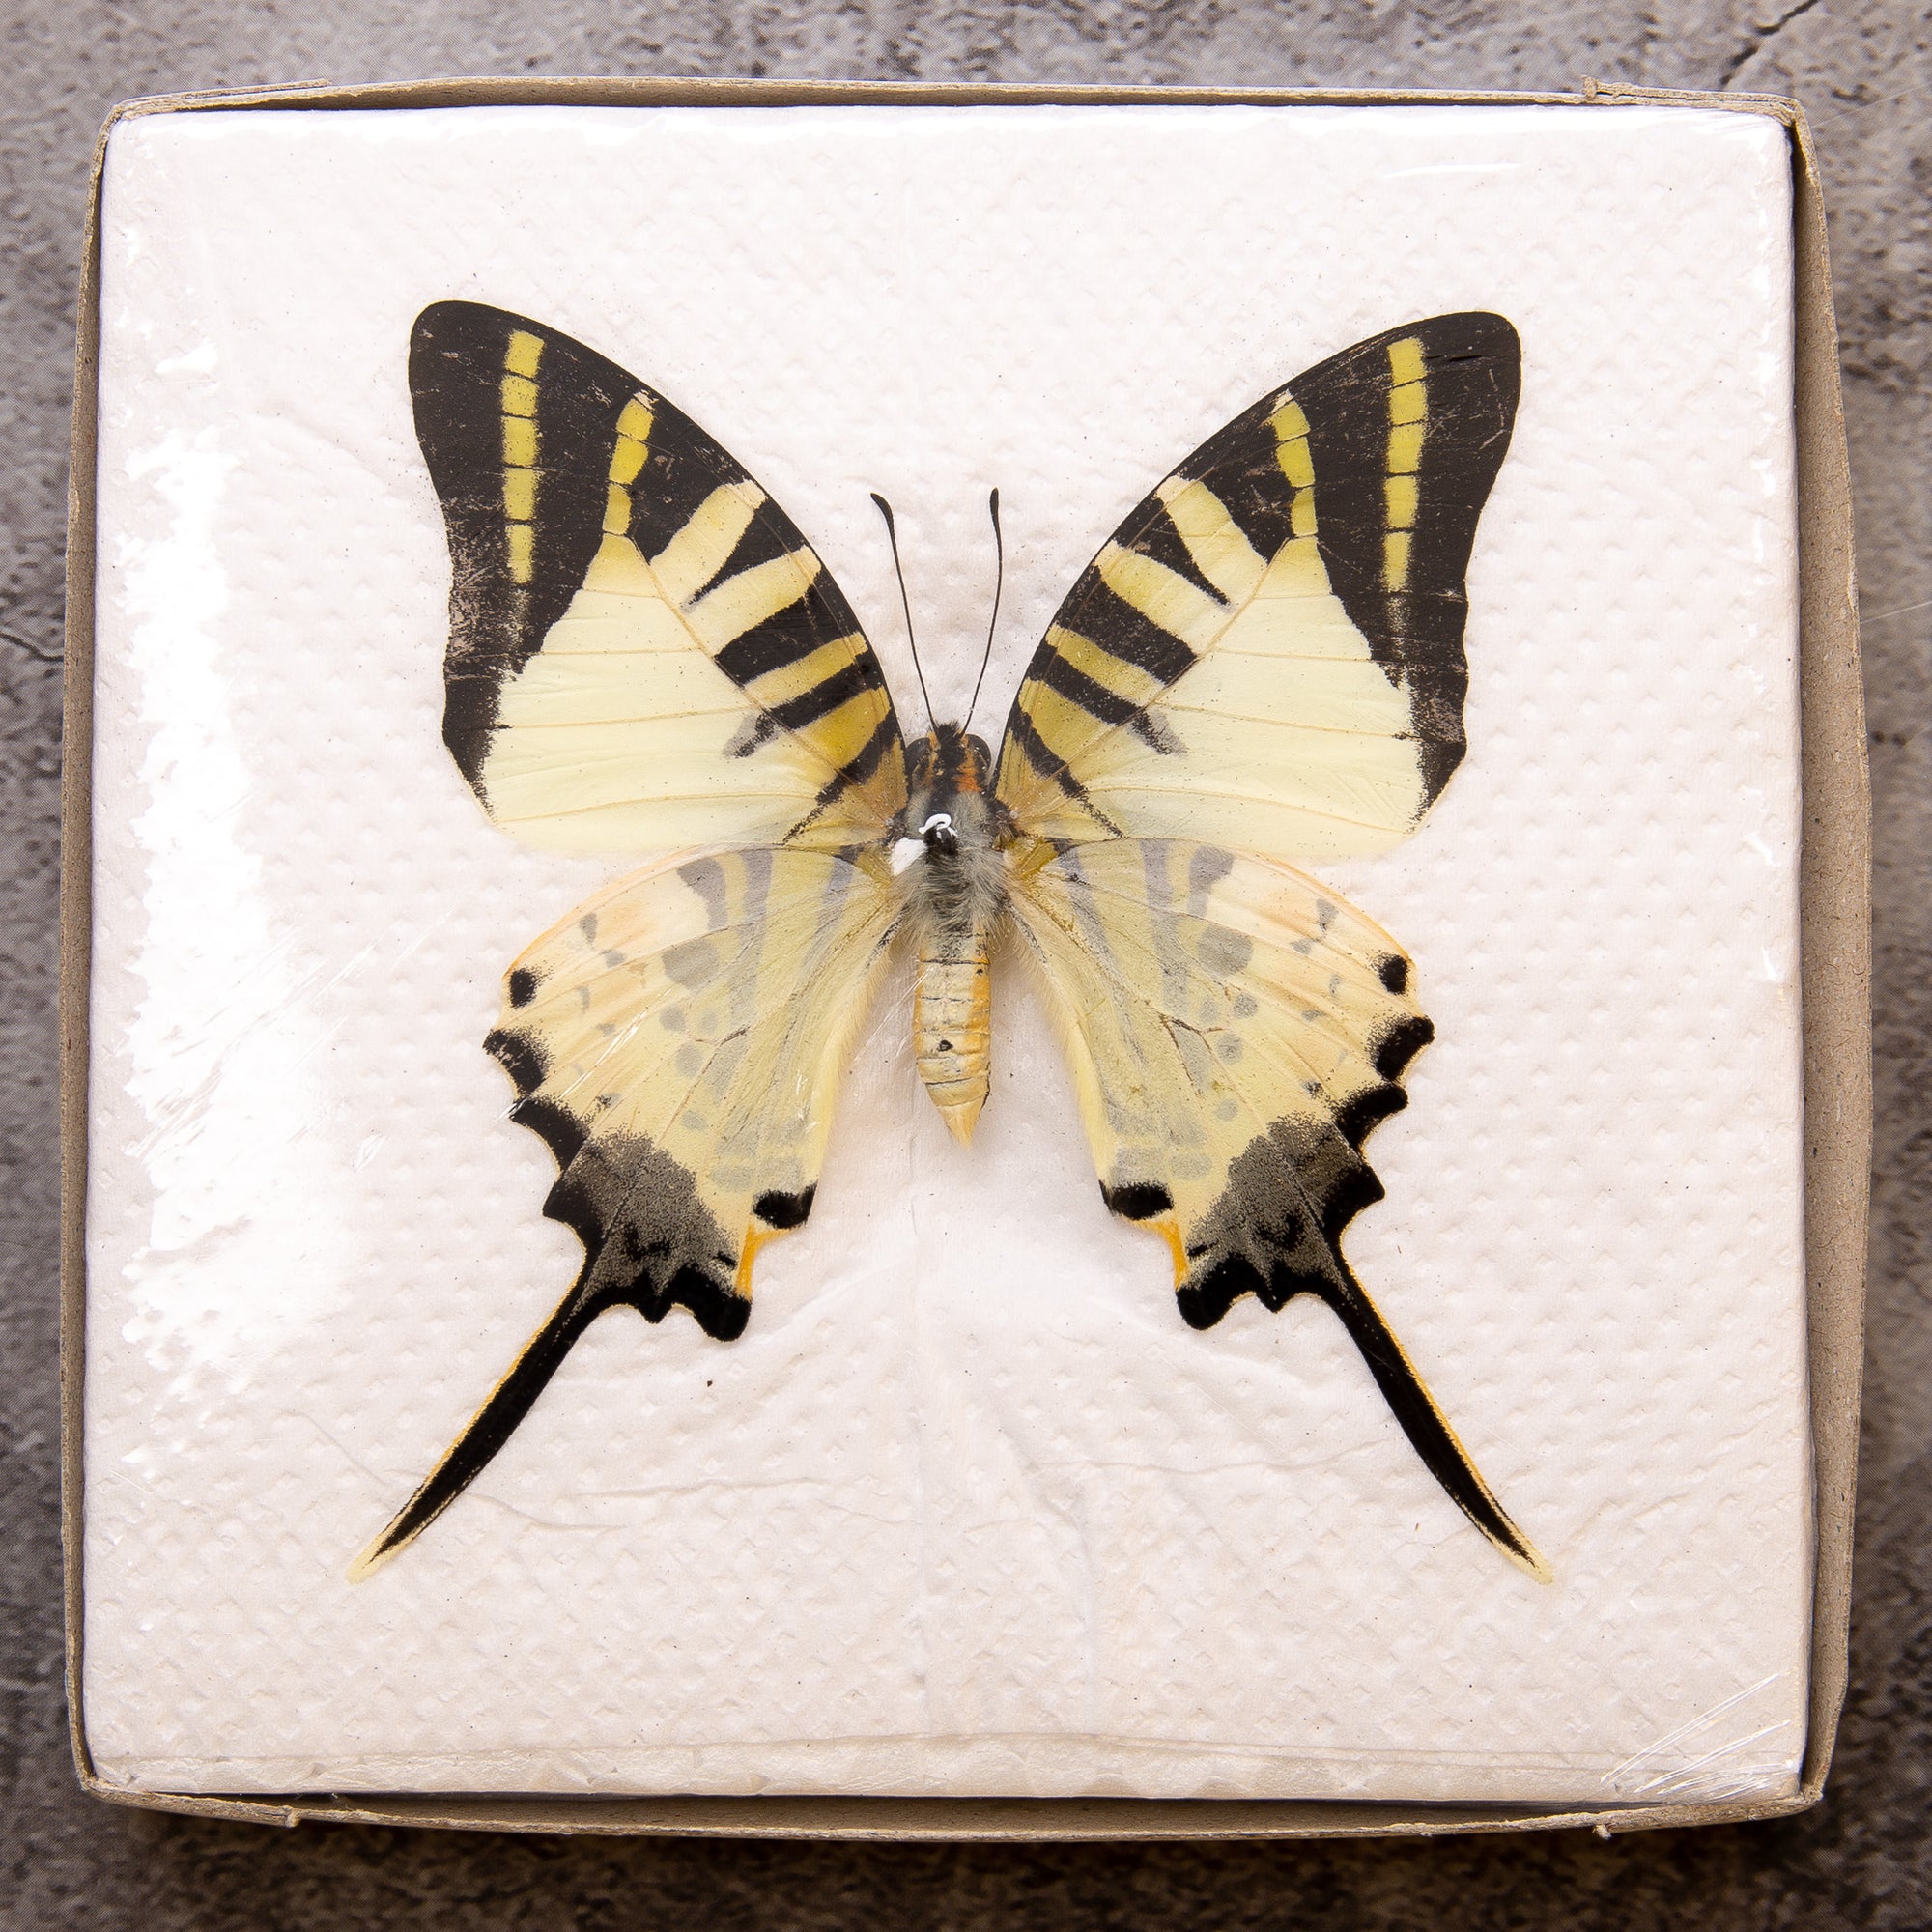 Dired Butterflies A1 Dry-preserved Real Butterfly Specimens WINGS SPREAD, Pack of 2,5,10,25